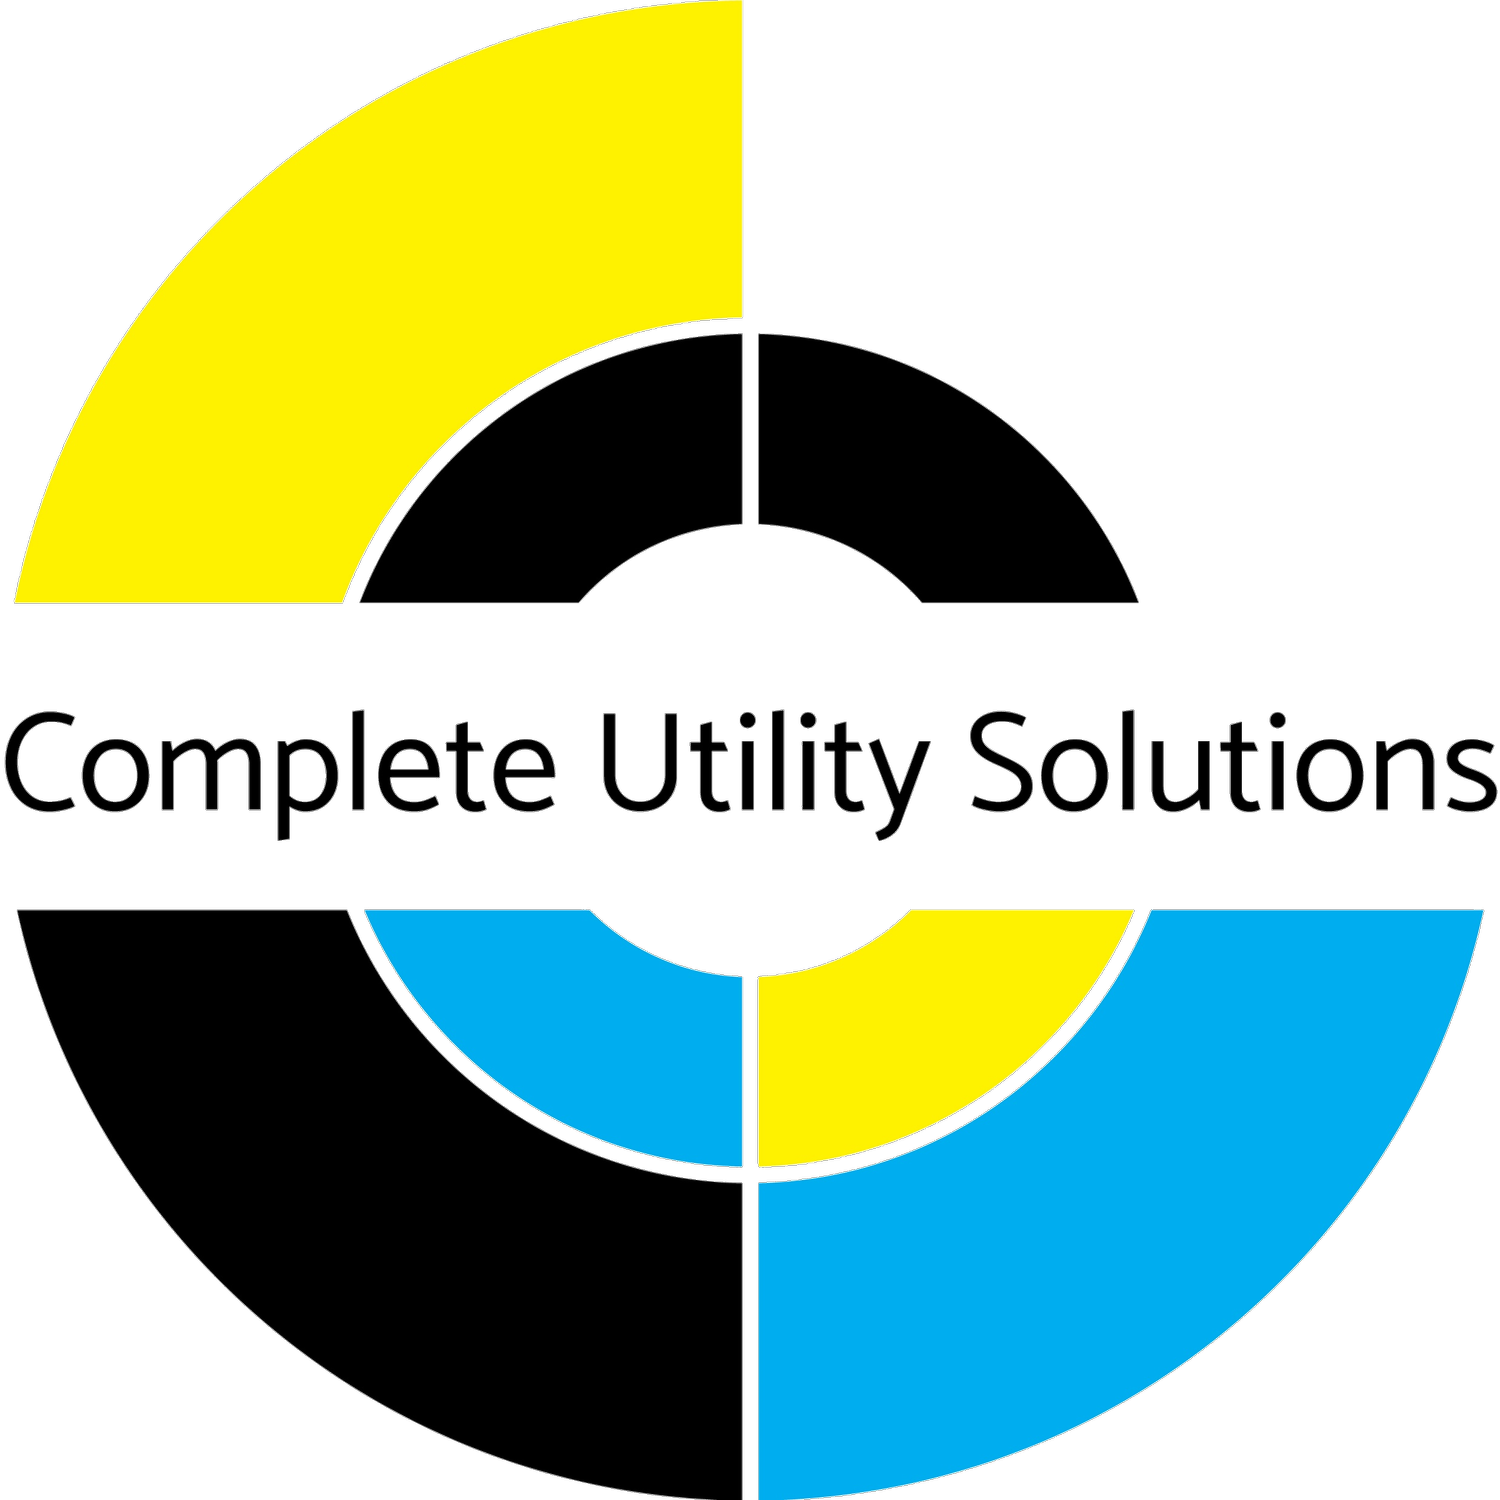 Complete Utility Solutions